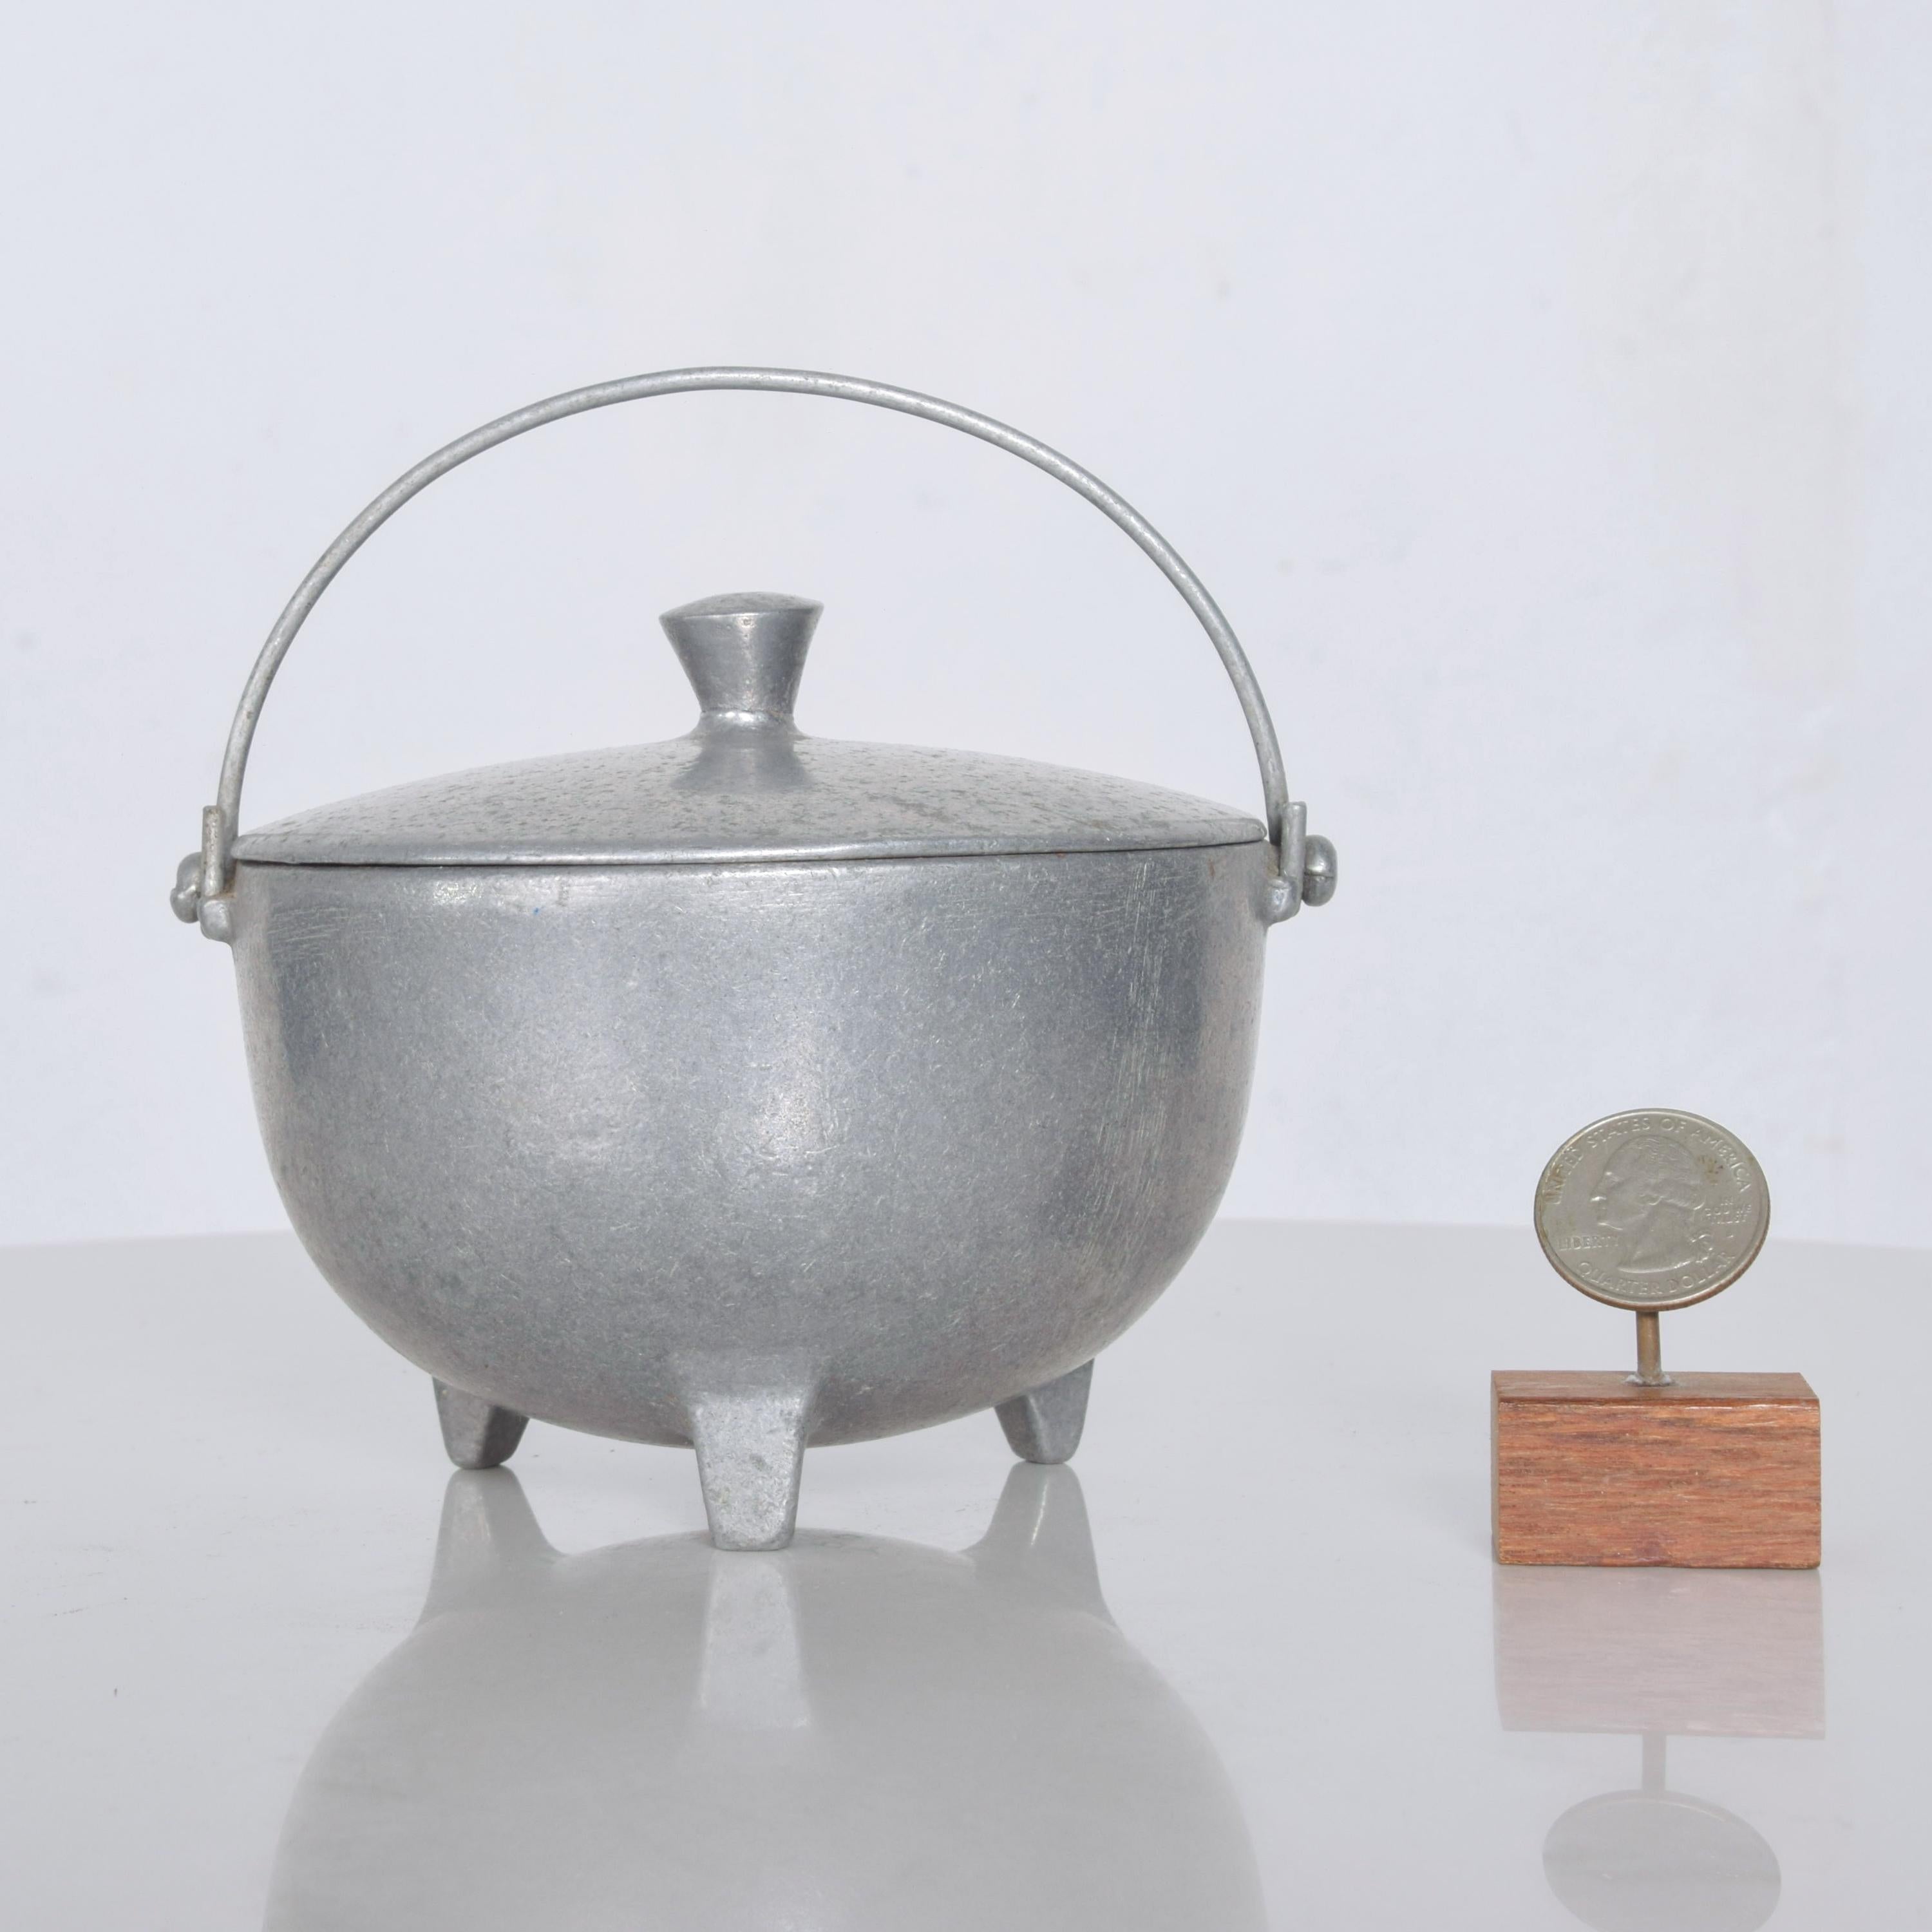 Vintage 1970s solid aluminum footed kettle pot Minalloy NYC
This is an aluminum alloy made to replicate antique pewter.
Sculptural industrial designed hand carry covered lid pot with three leg footed base.
Fantastic industrial decorative